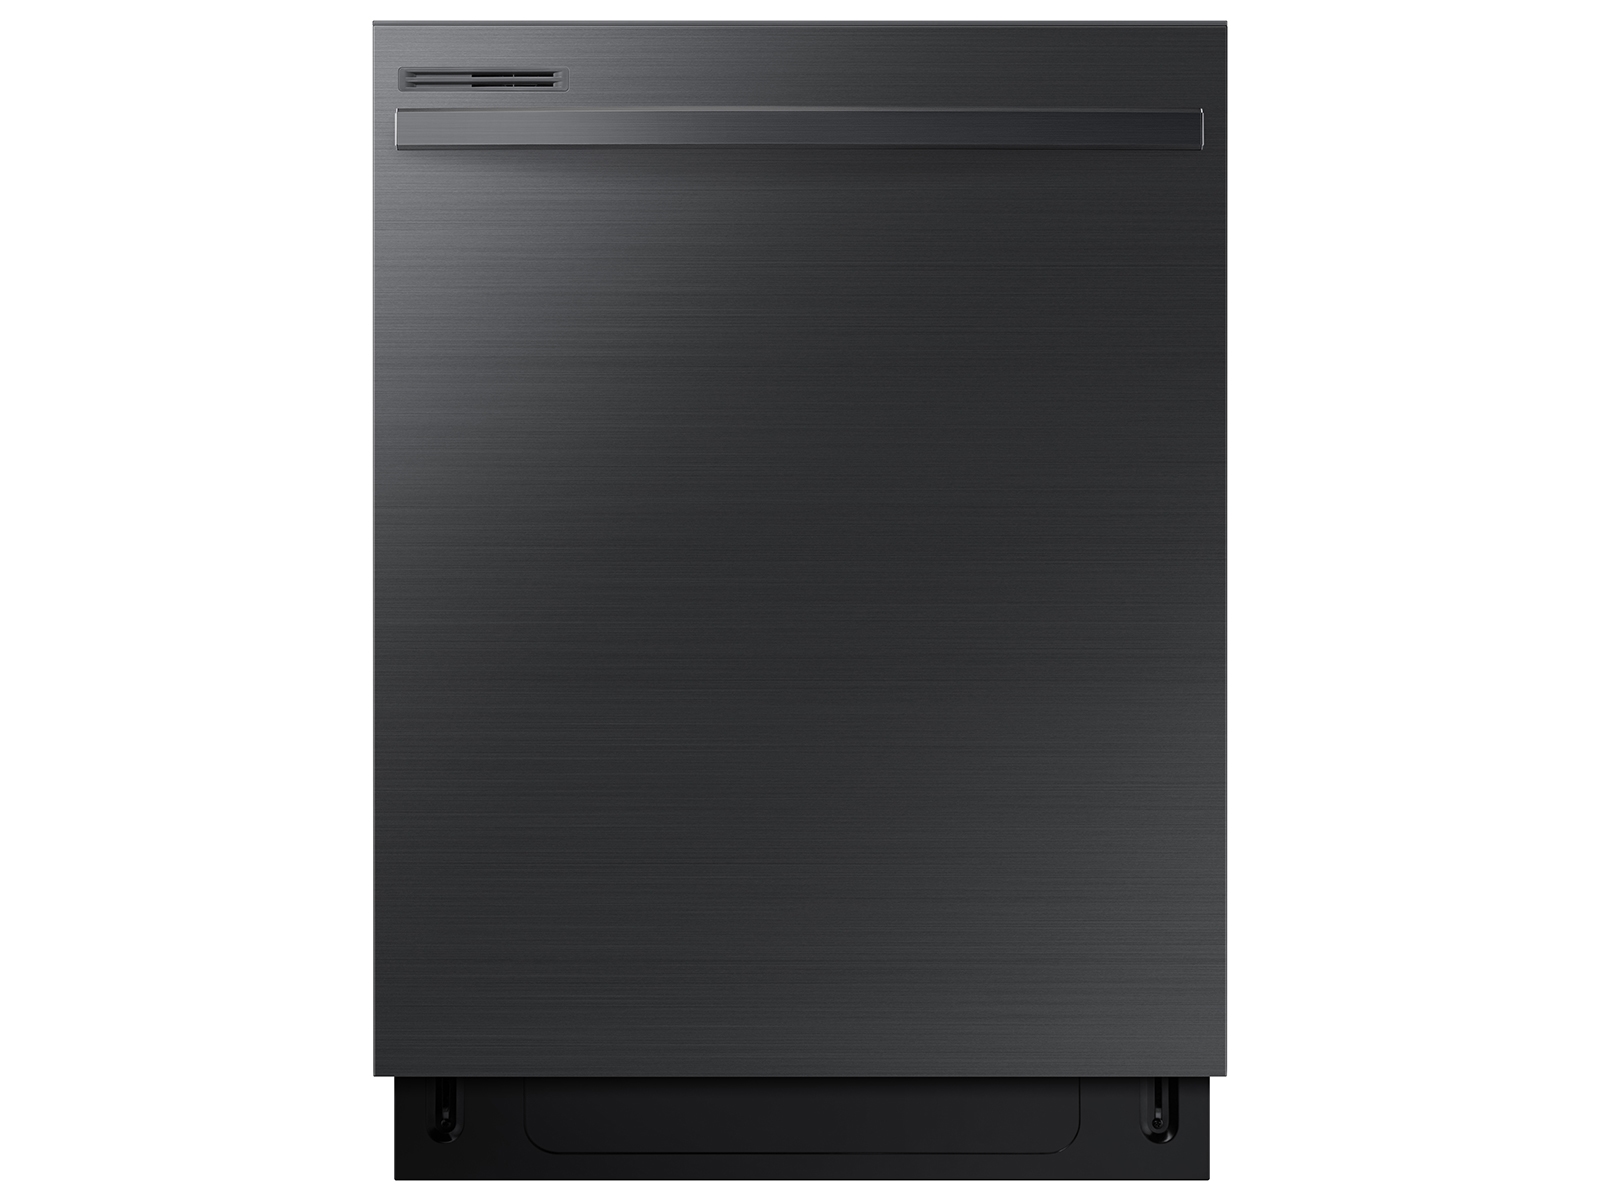 Samsung Digital Touch Control 55 dBA Dishwasher in Black Stainless Steel(DW80R2031UG/AA)